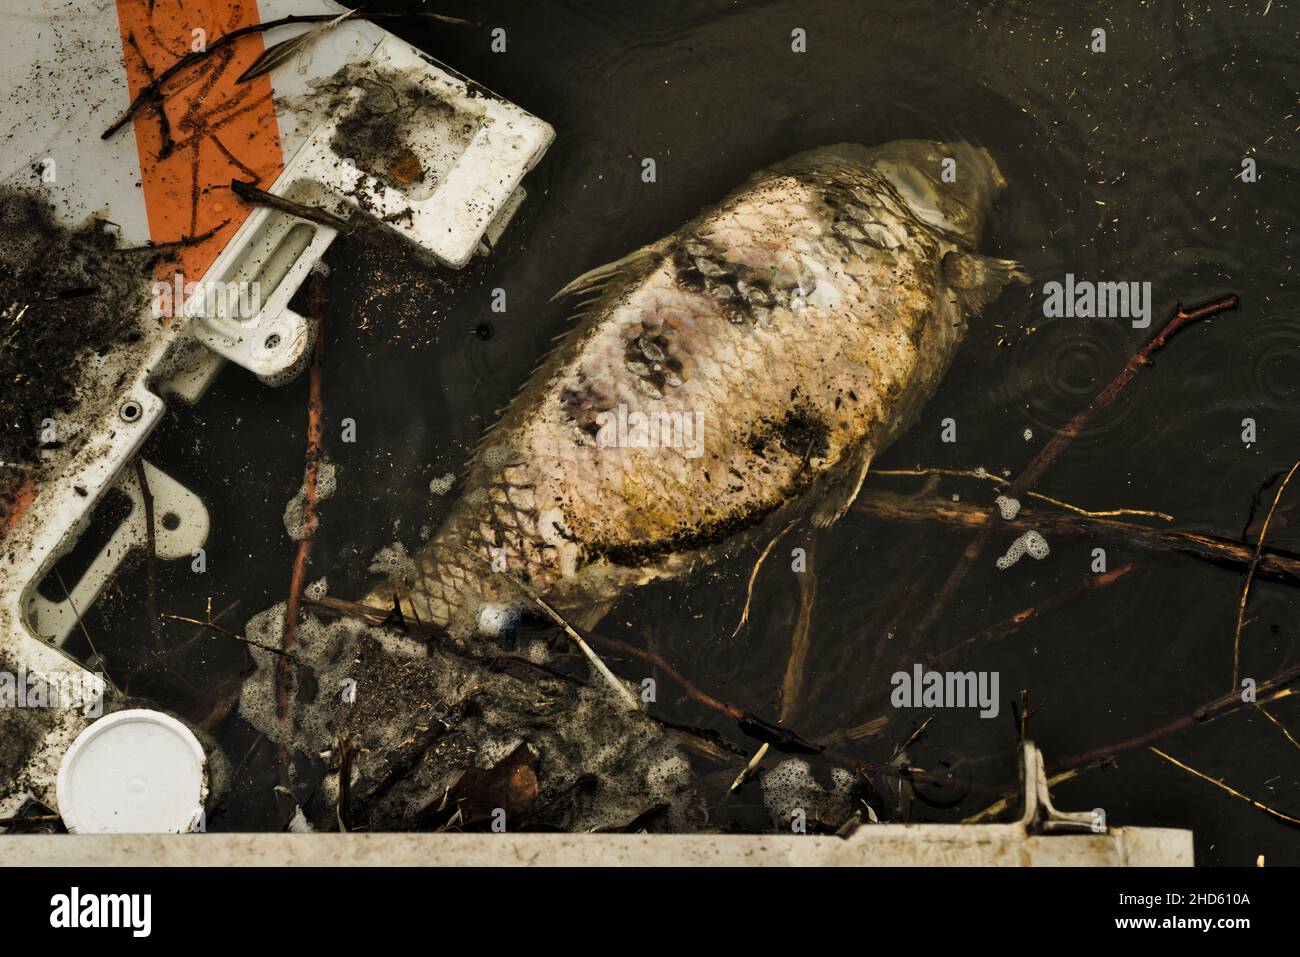 Dead fish floating in trashy like water that looks toxic  Polluted water or climate change or what? Stock Photo